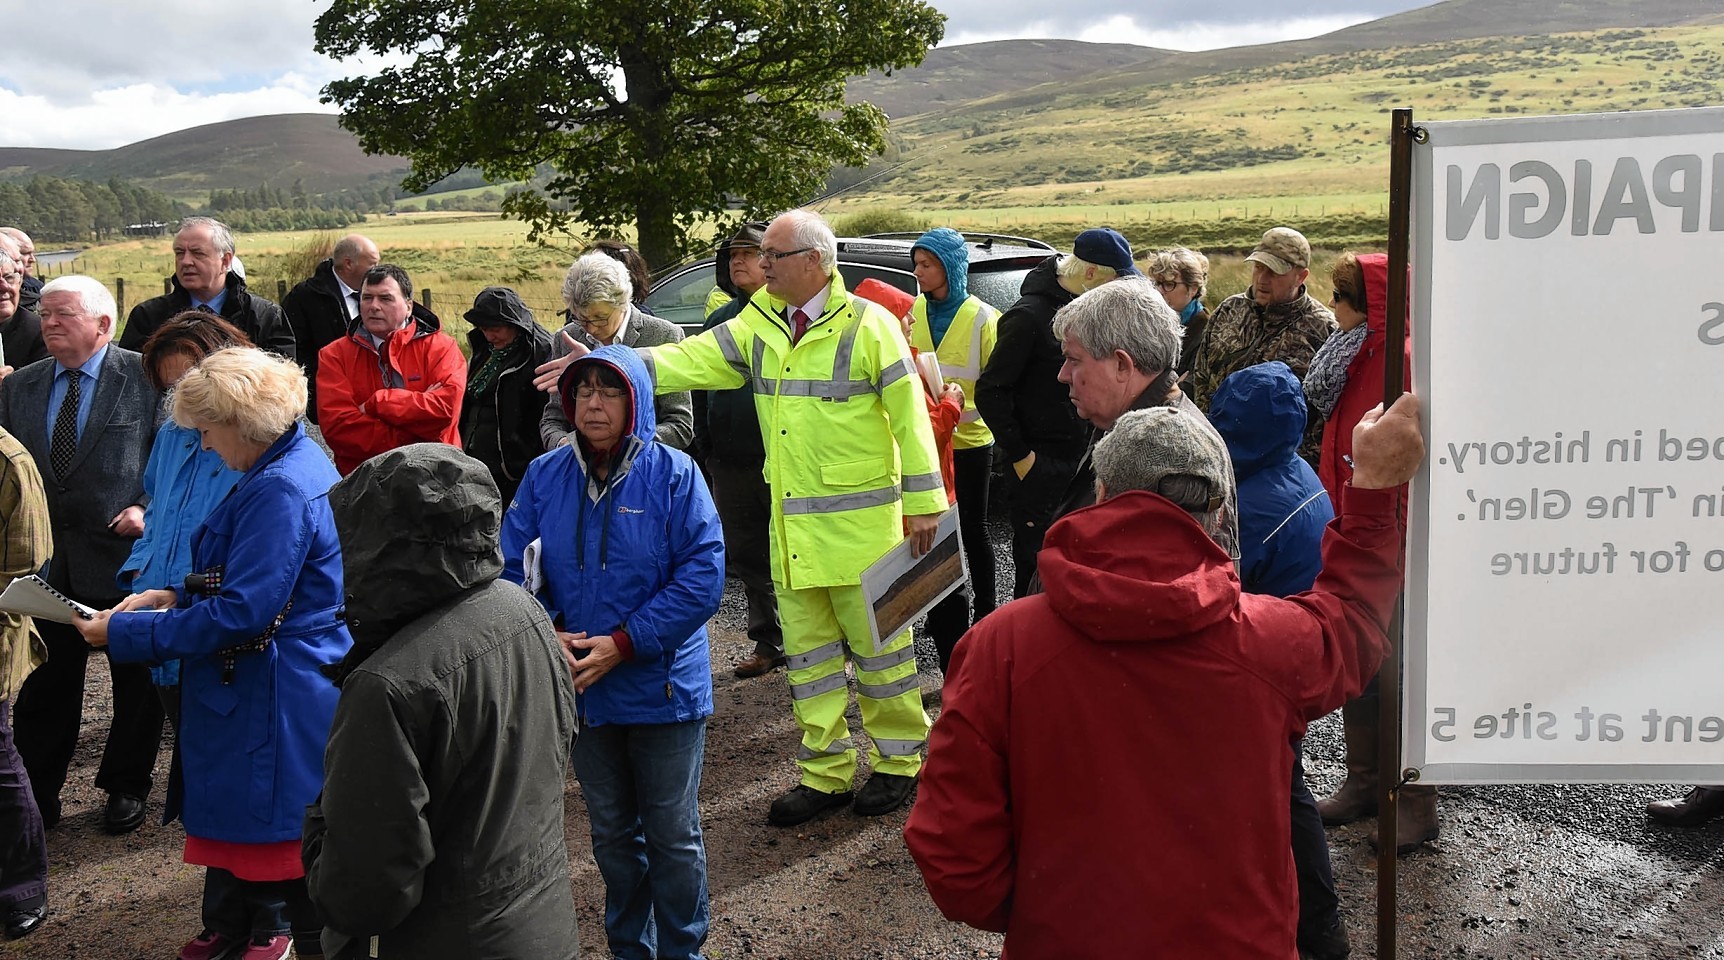 Protesters at the Tomatin Sub Station site visit.